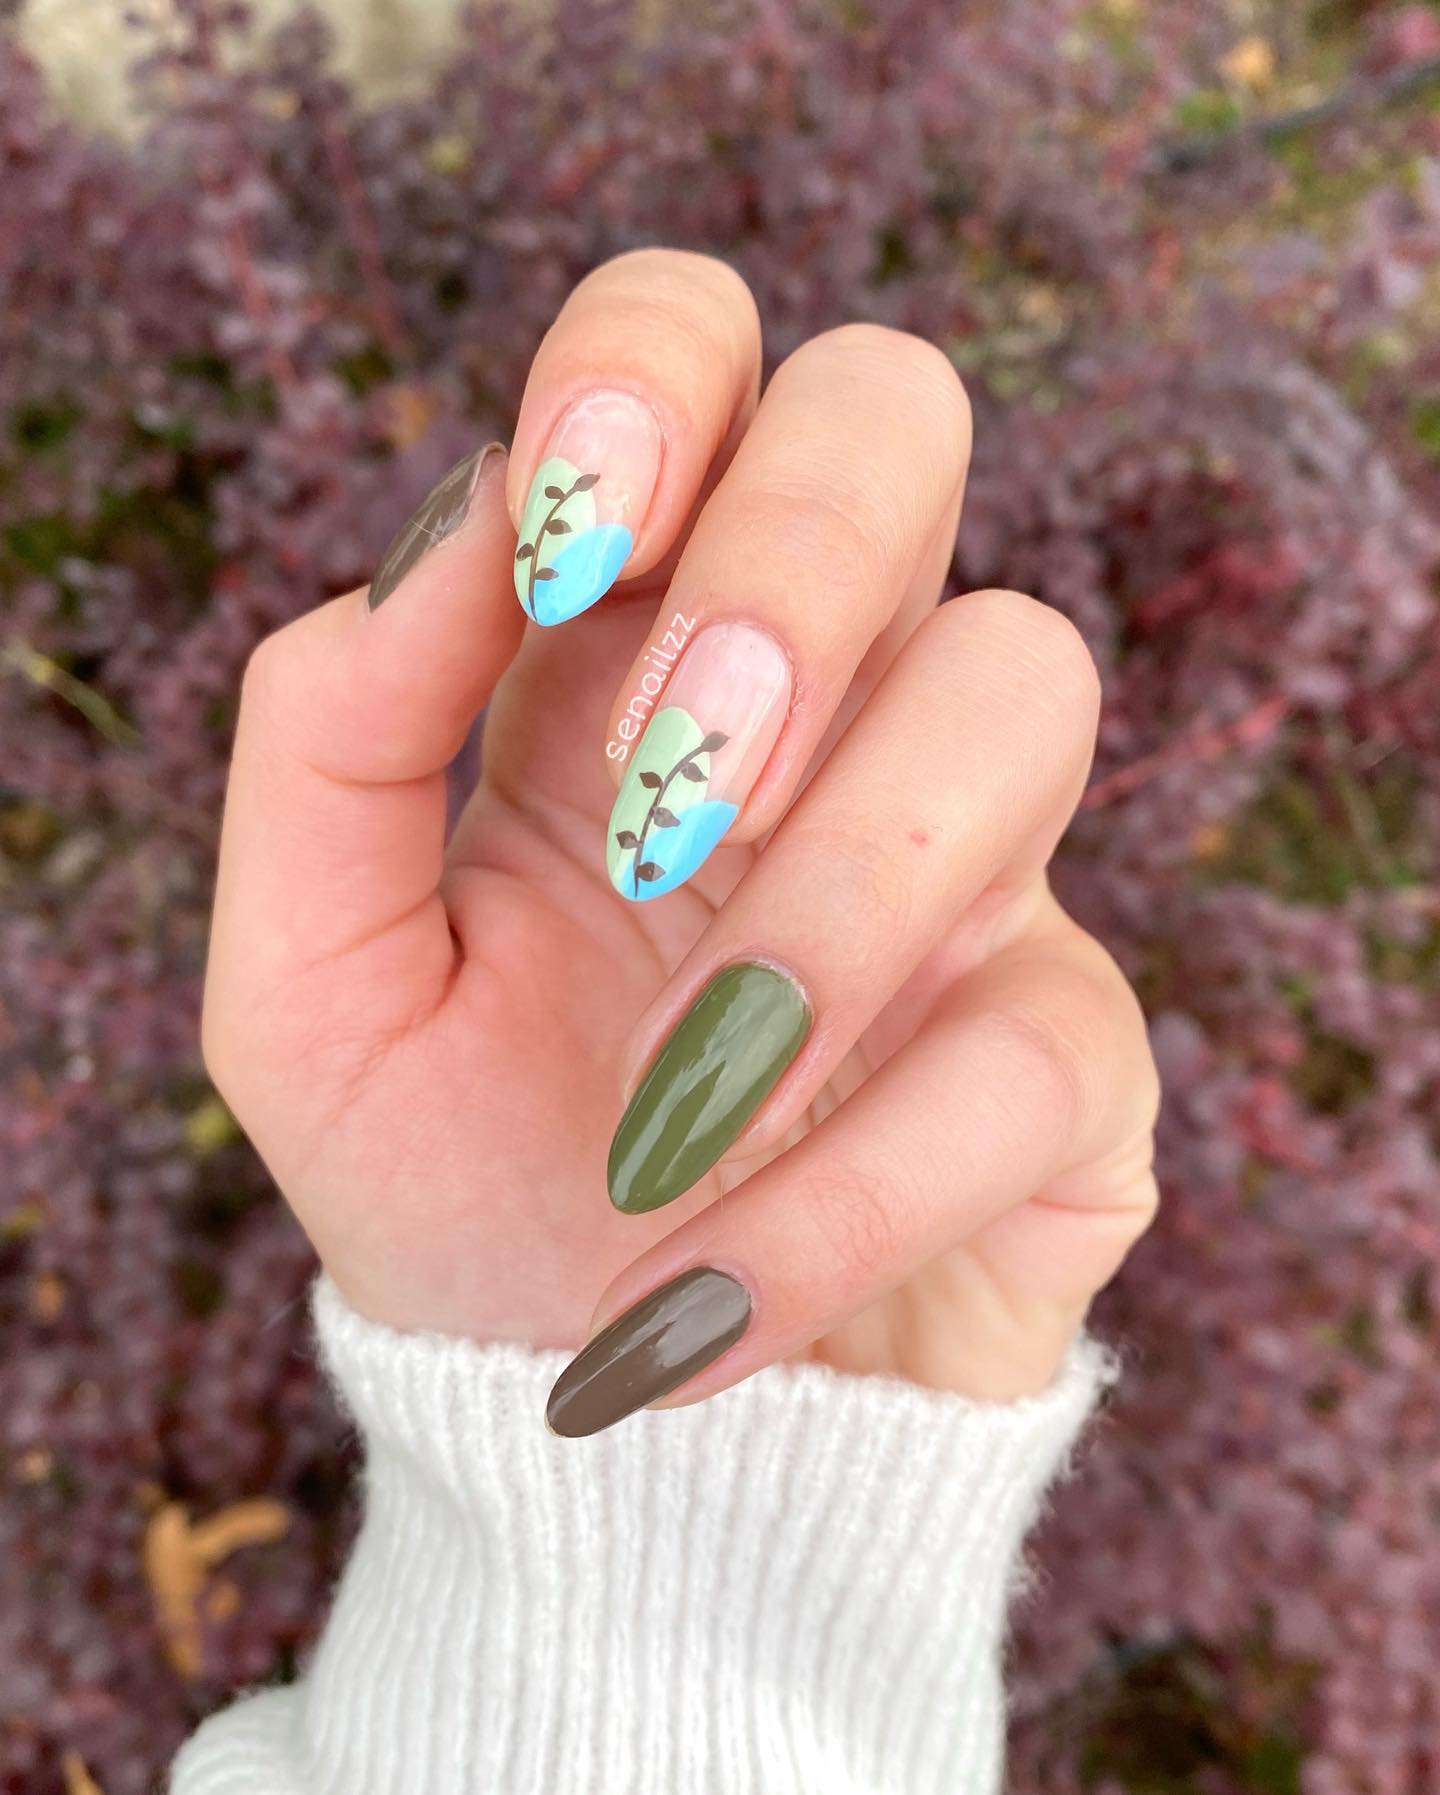 The 100+ Best Nail Designs Trends And Ideas In 2021 images 77